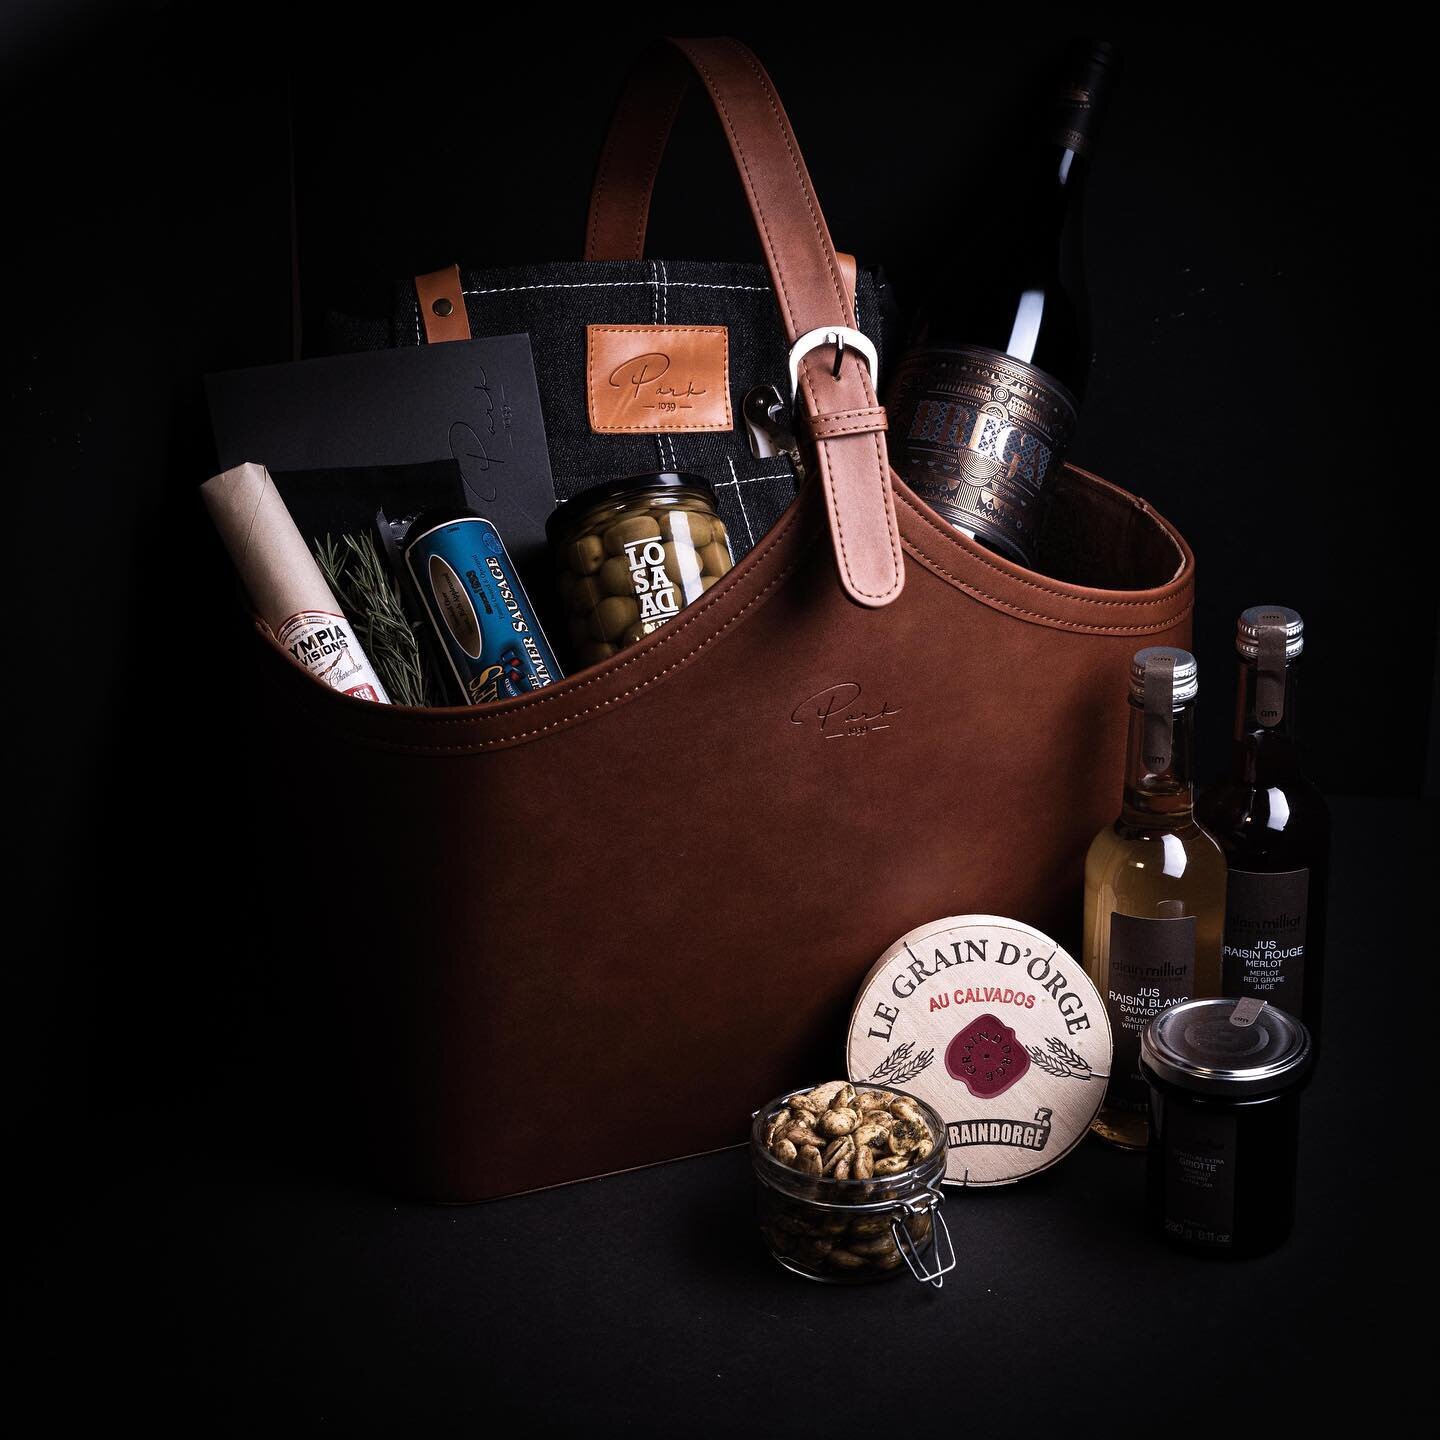 Give the gift of luxury gift baskets to your favorite friends, family, or clients. Featuring high quality culinary gifts from Europe and a selection of house made gourmet foods, this hand-made leather gift basket is sure to impress. To make it even m